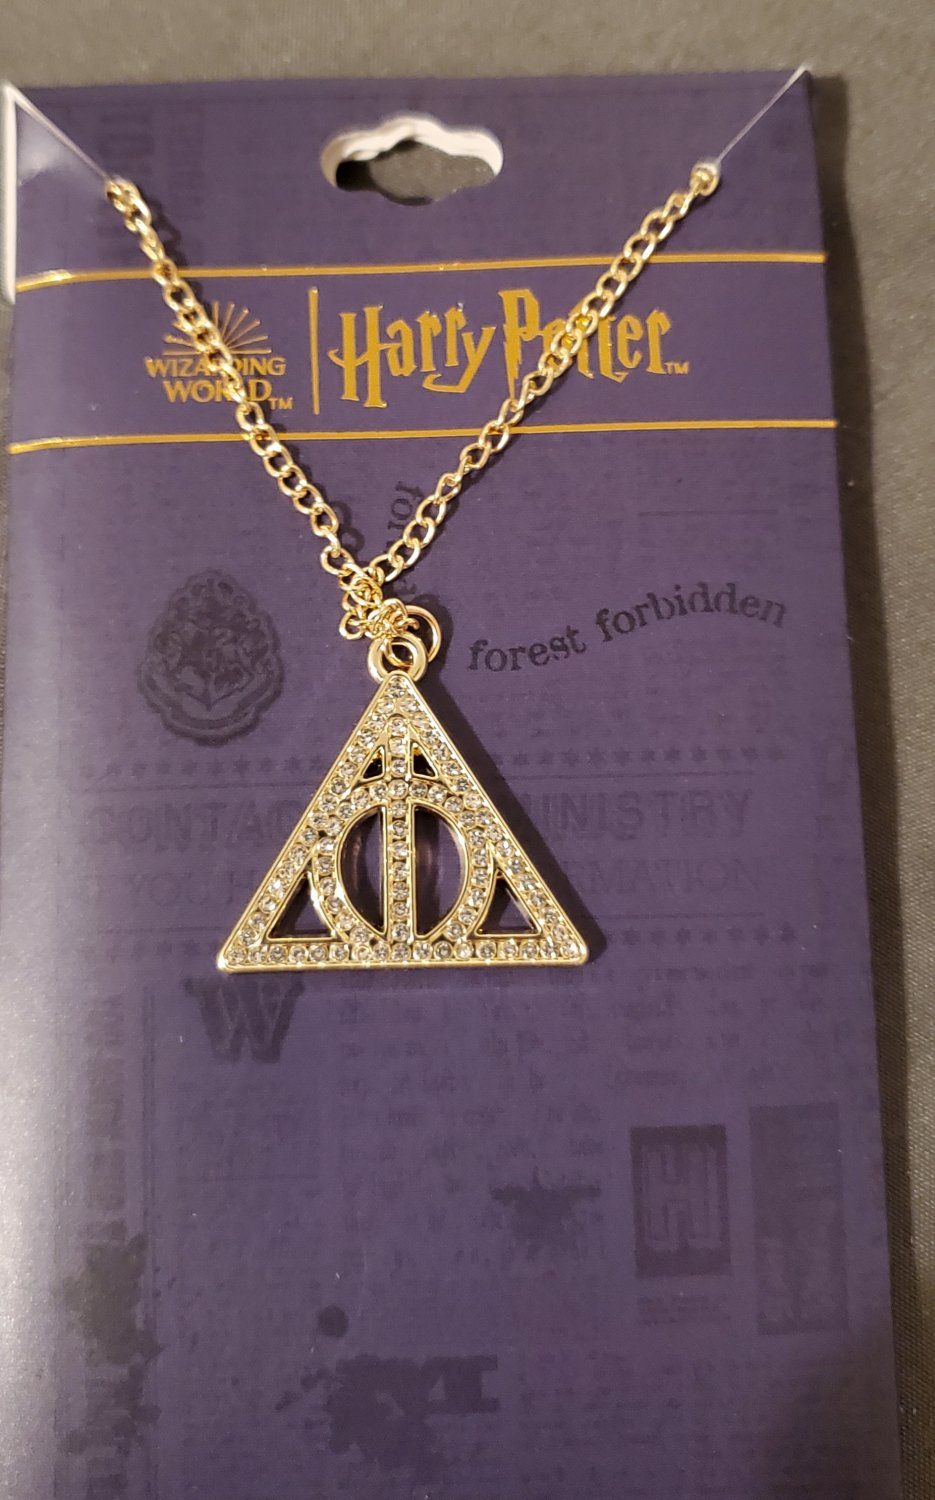 Harry Potter deathly hallows necklace rhinestones gold tone